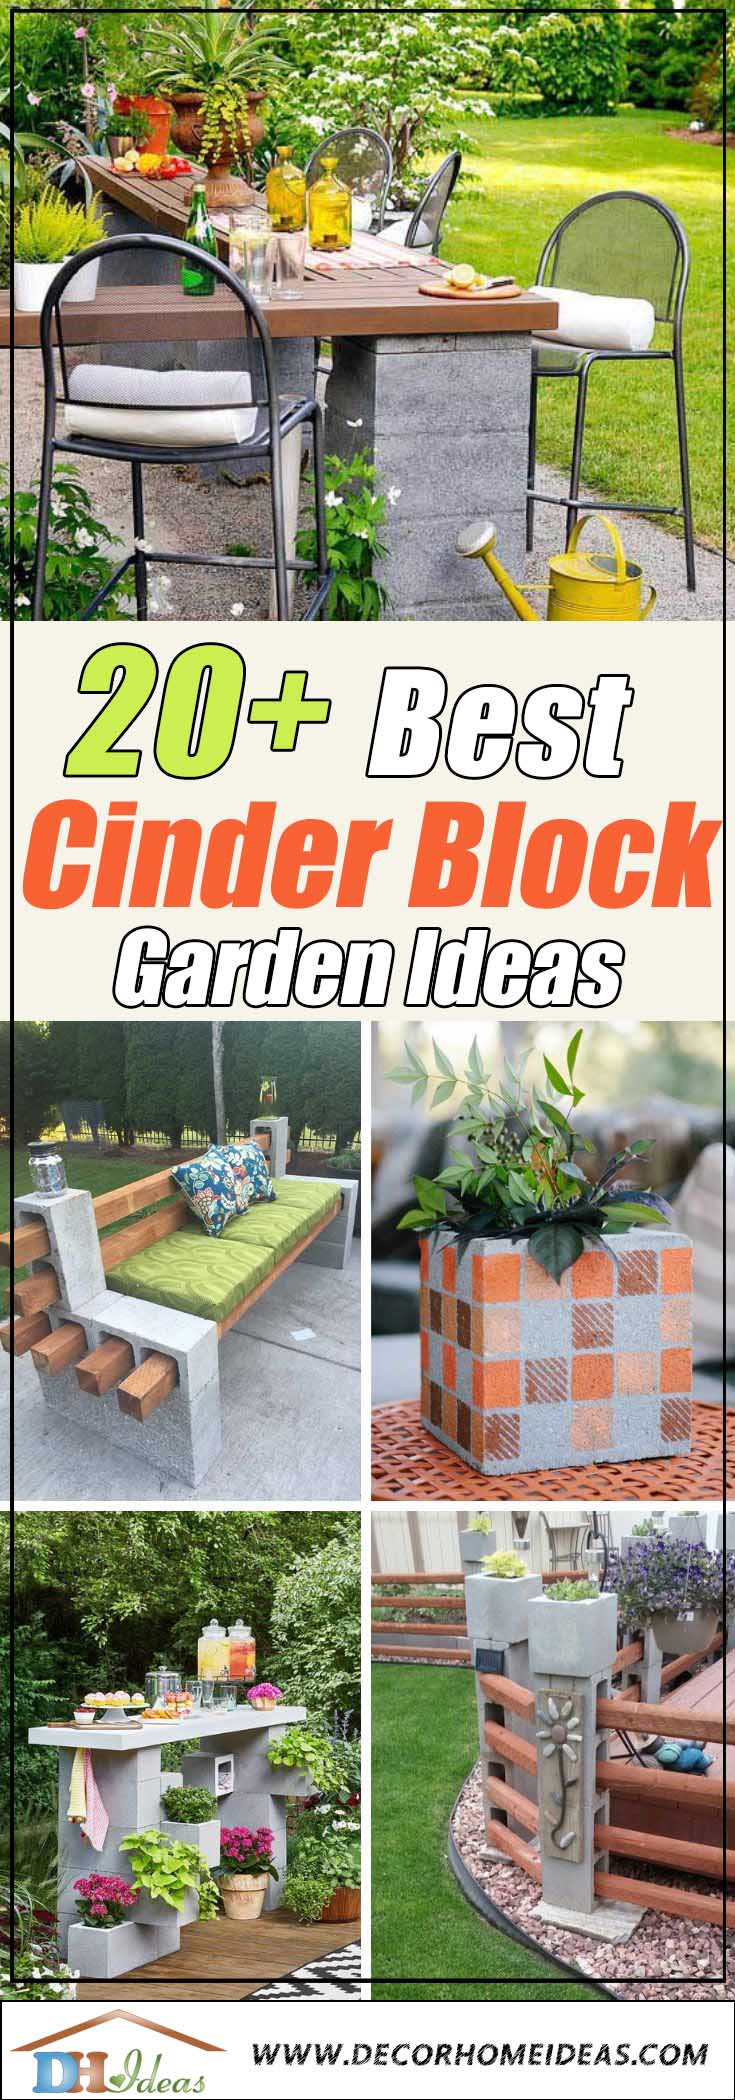 20+ Cool Ways To Use Cinder Blocks In The Garden | Decor Home Ideas